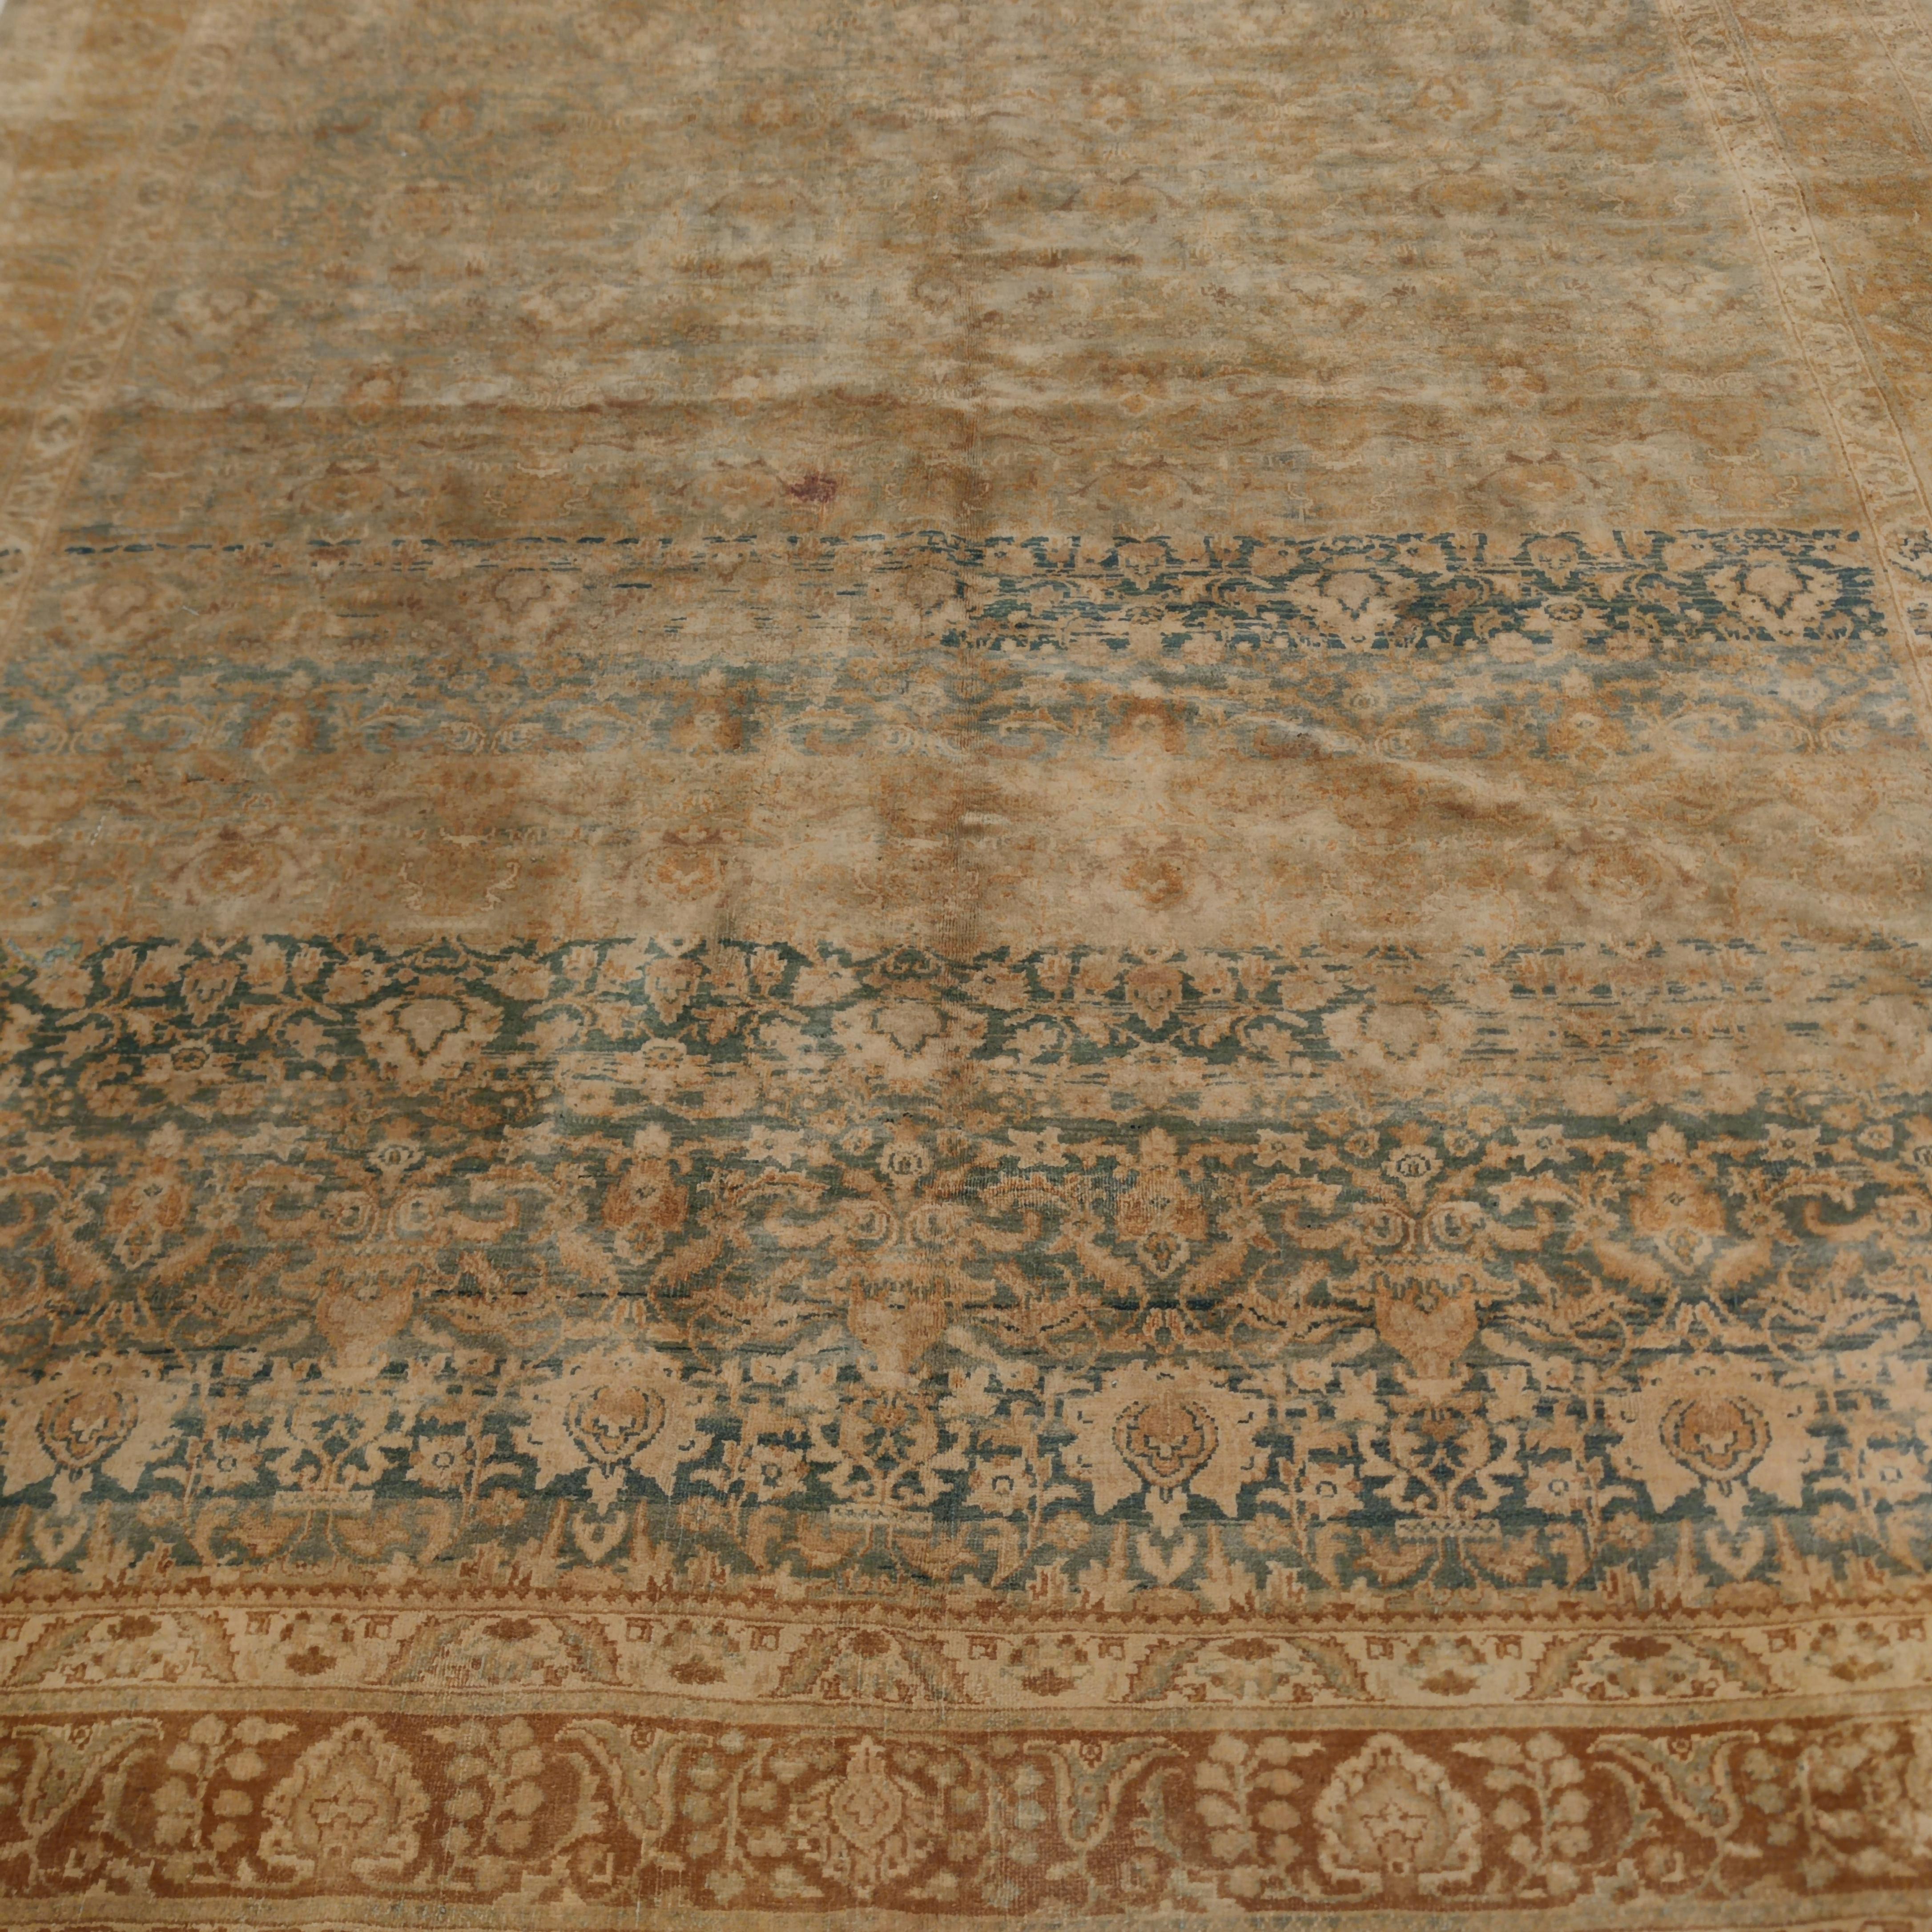 Wool Antique Teal Blue Agra Rug with All-Over Pattern